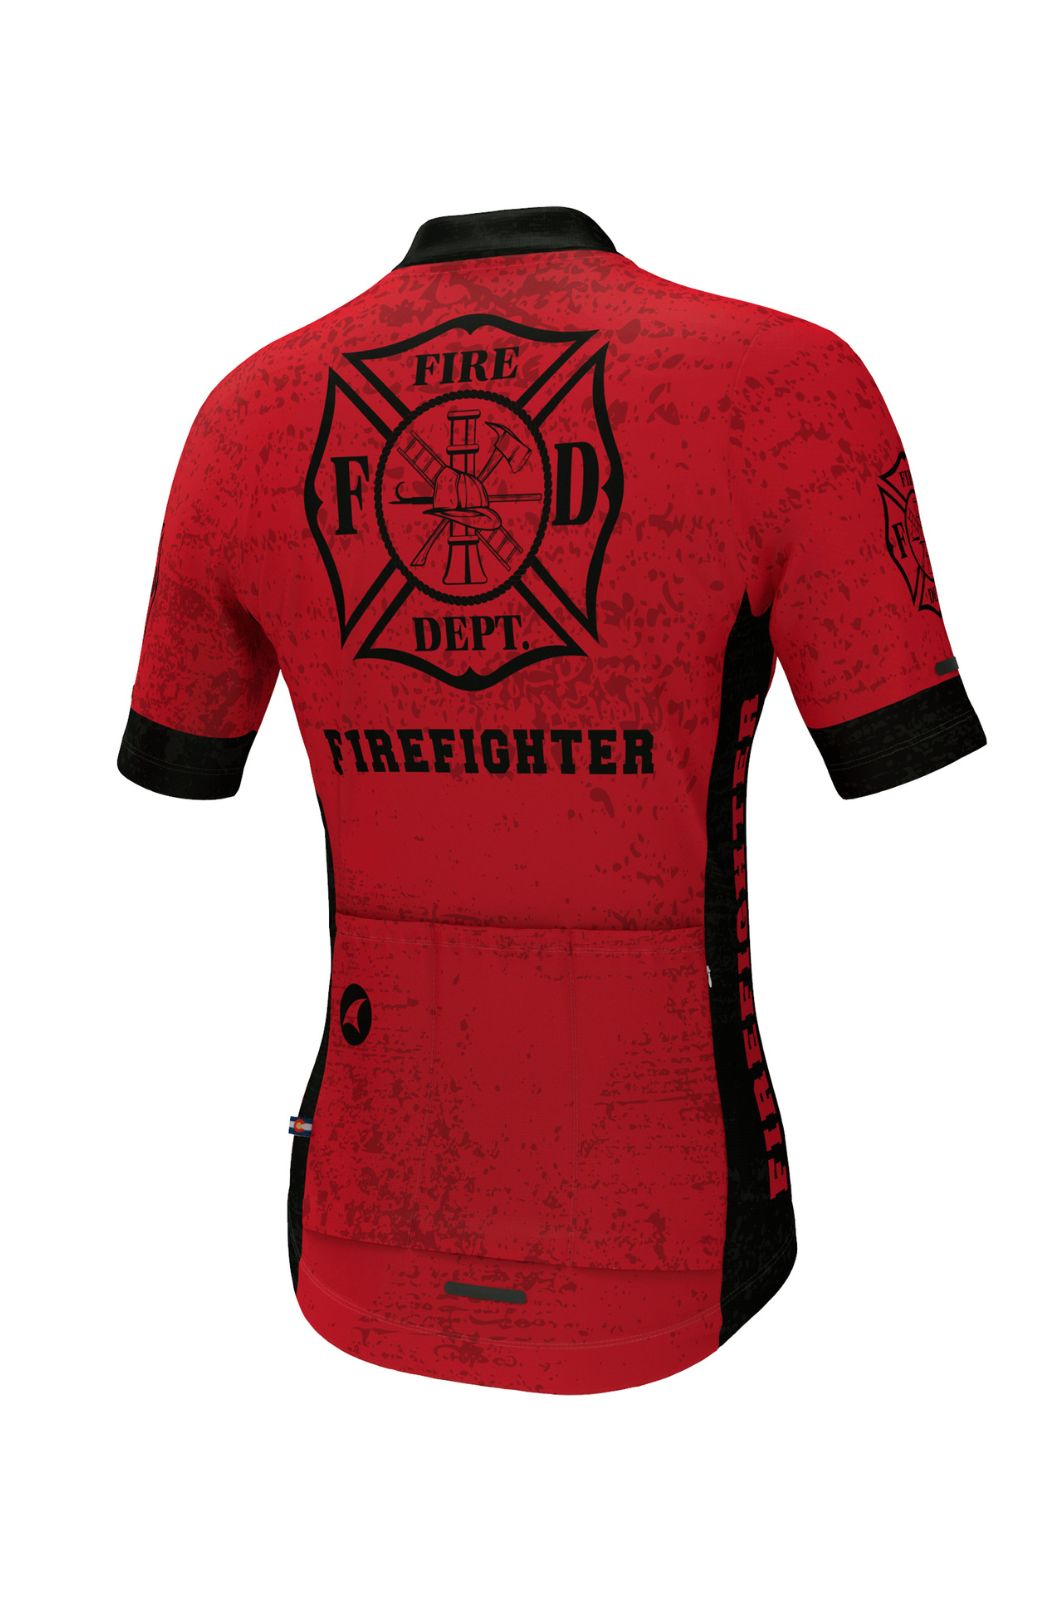 Women's First Responder Firefighter Cycling Jersey - Back View